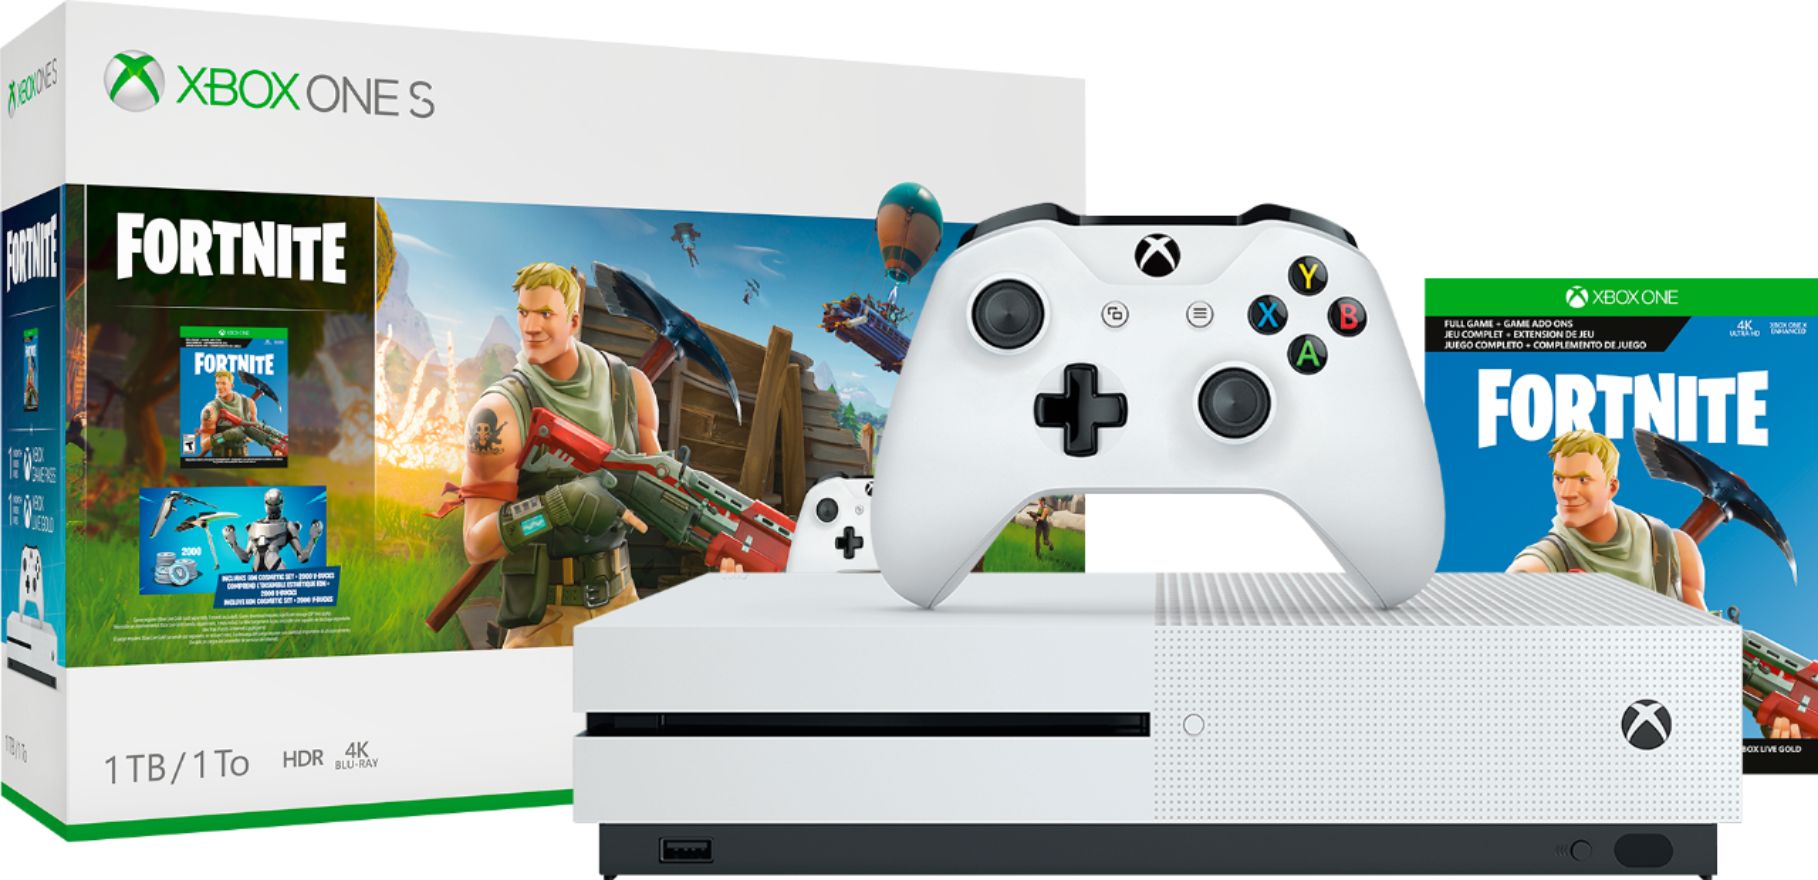 opdragelse Melting Hold op Microsoft Xbox One S 1TB Fortnite Bundle with 4K Ultra HD Blu-ray White  234-00703 - Best Buy